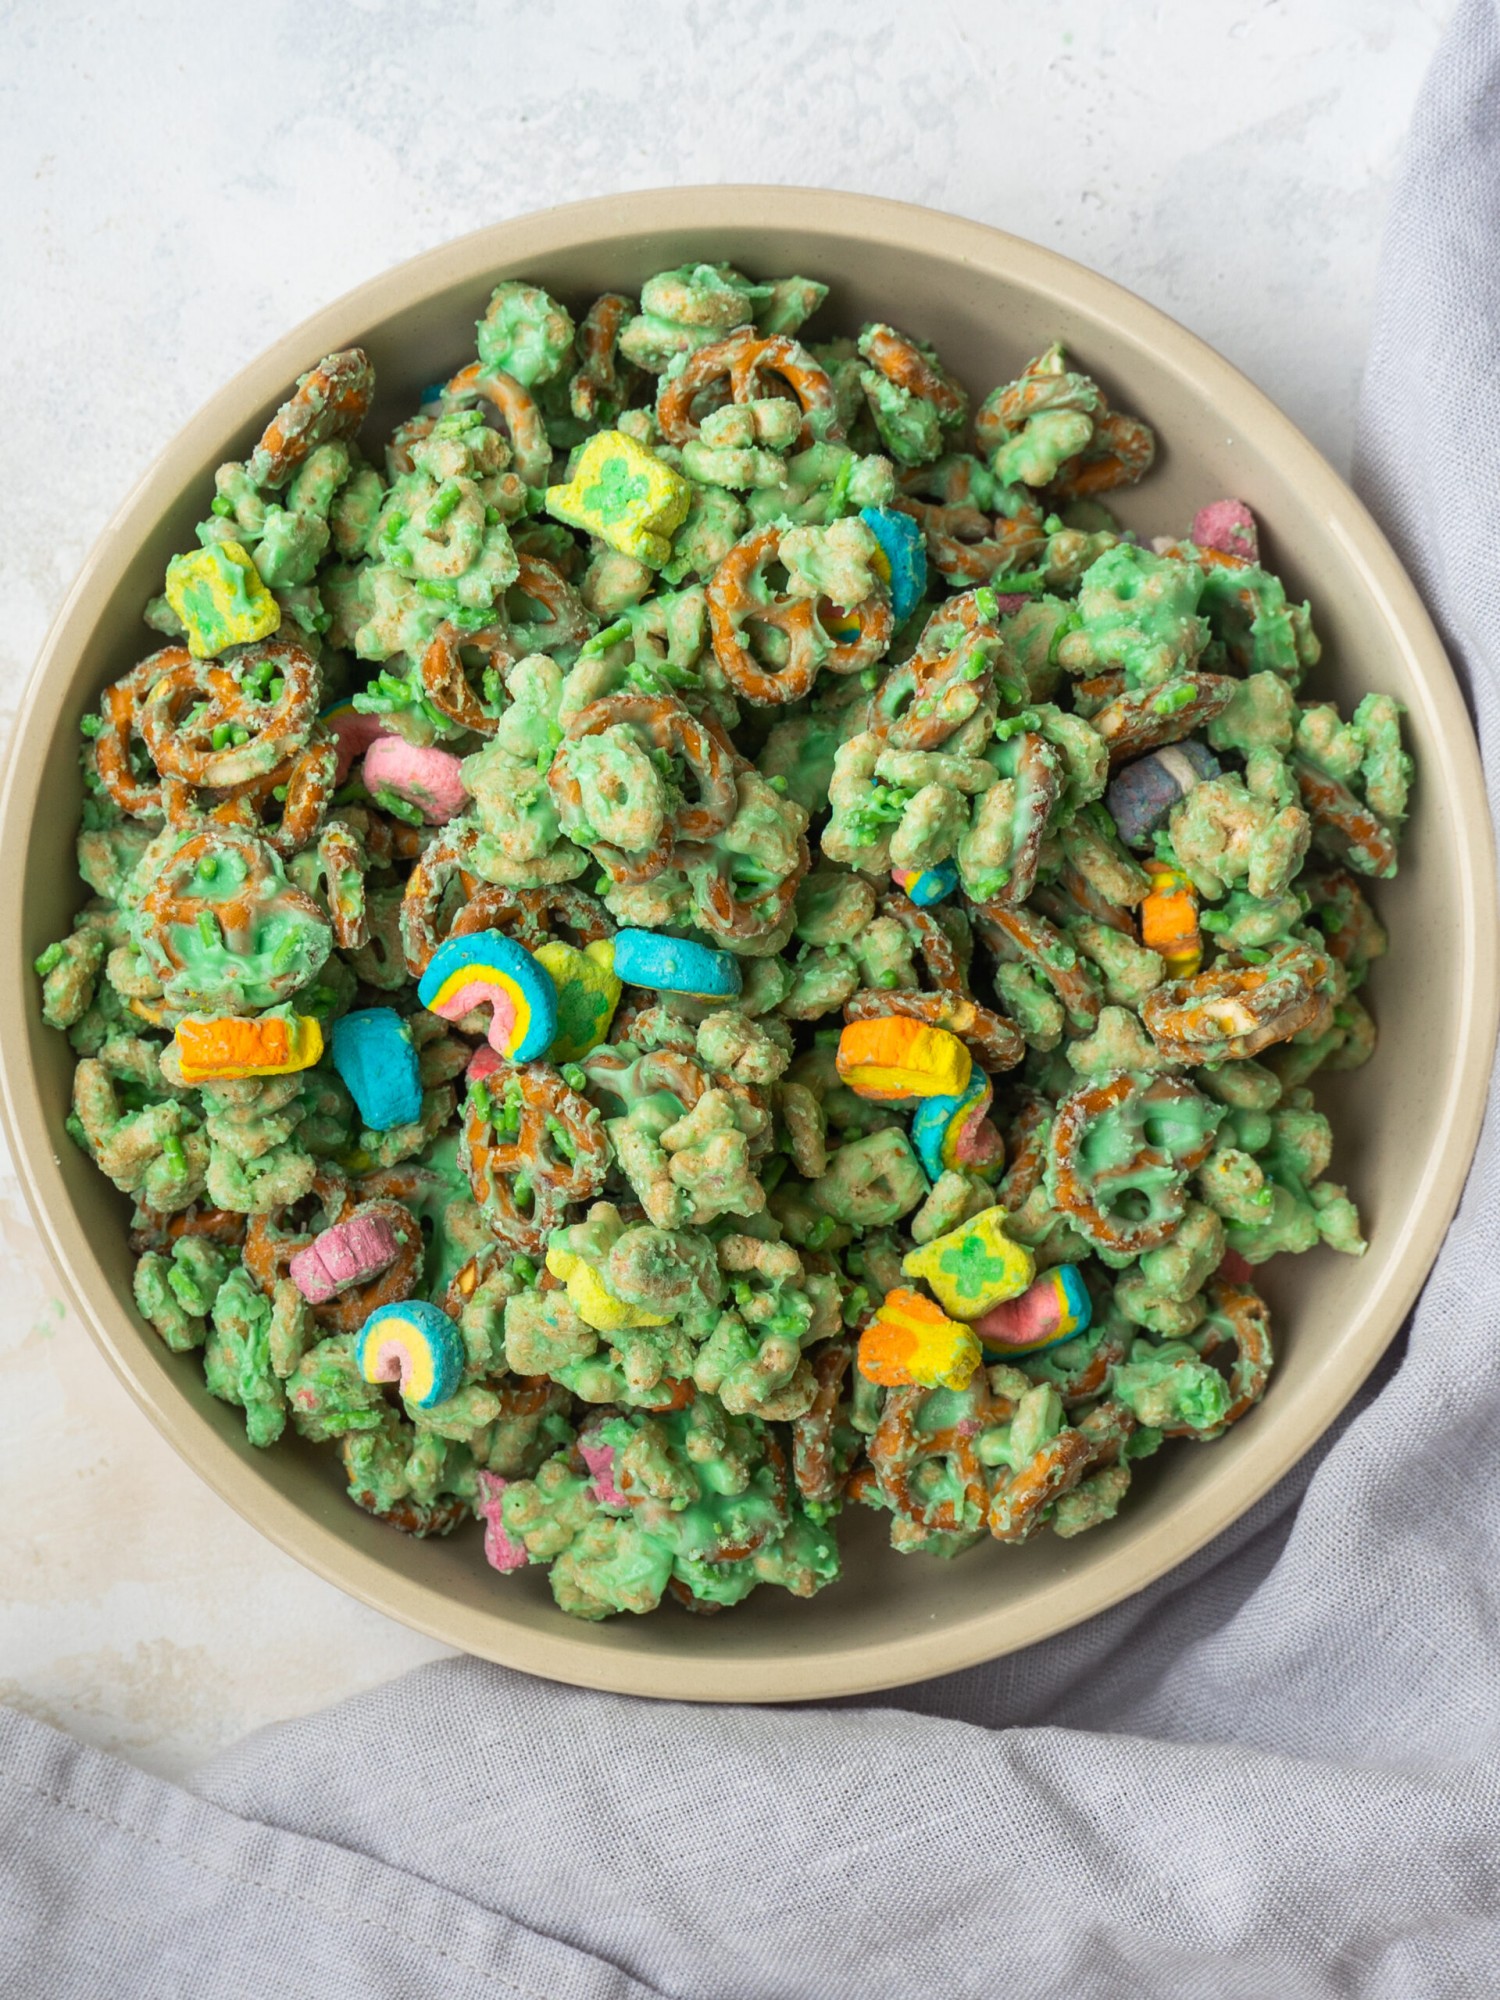 Lucky charms tossed in a green white chocolate in a small serving bowl